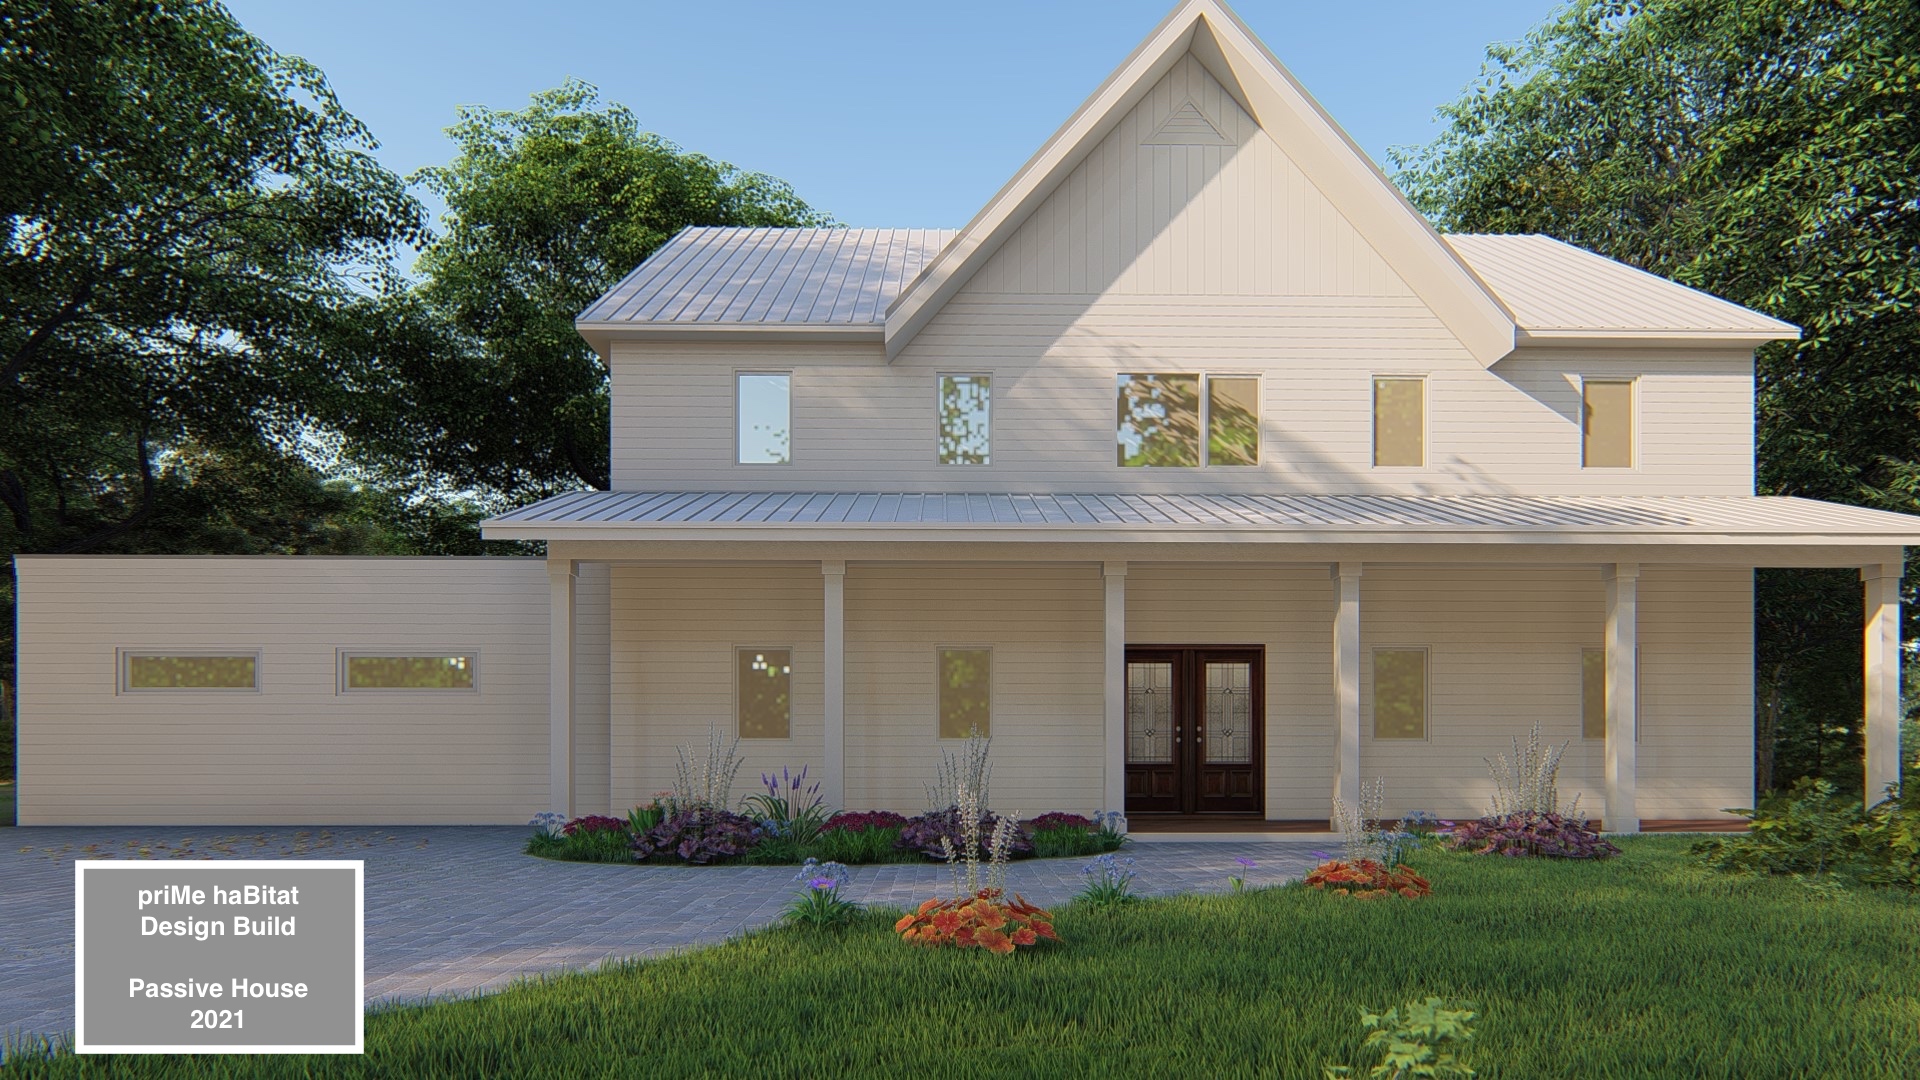 2021/2022 Passive House Rendering for Farmhouse.